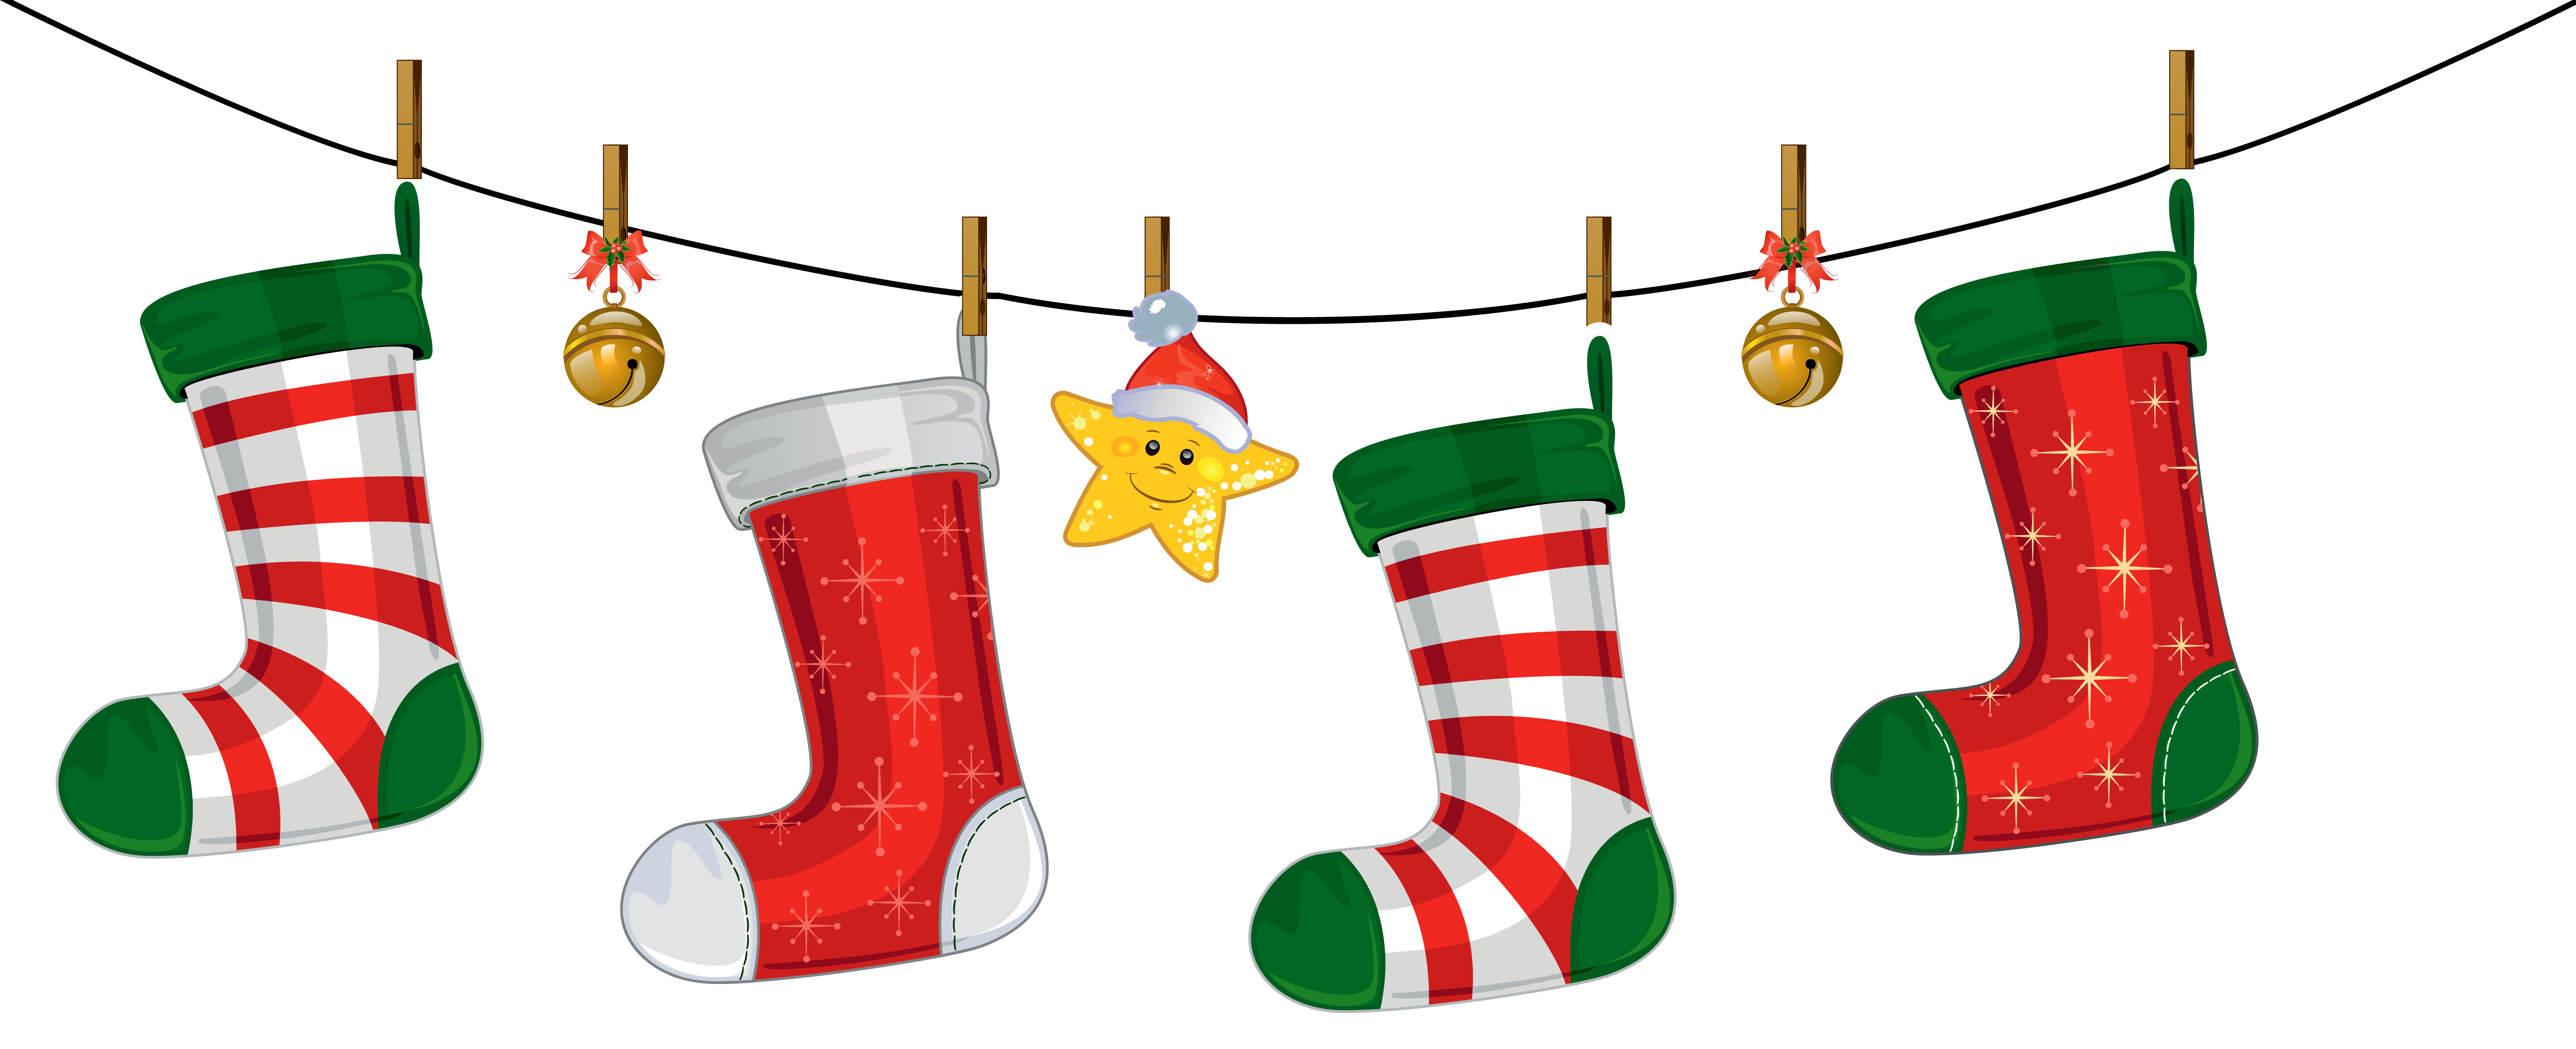 christmas clipart images · c